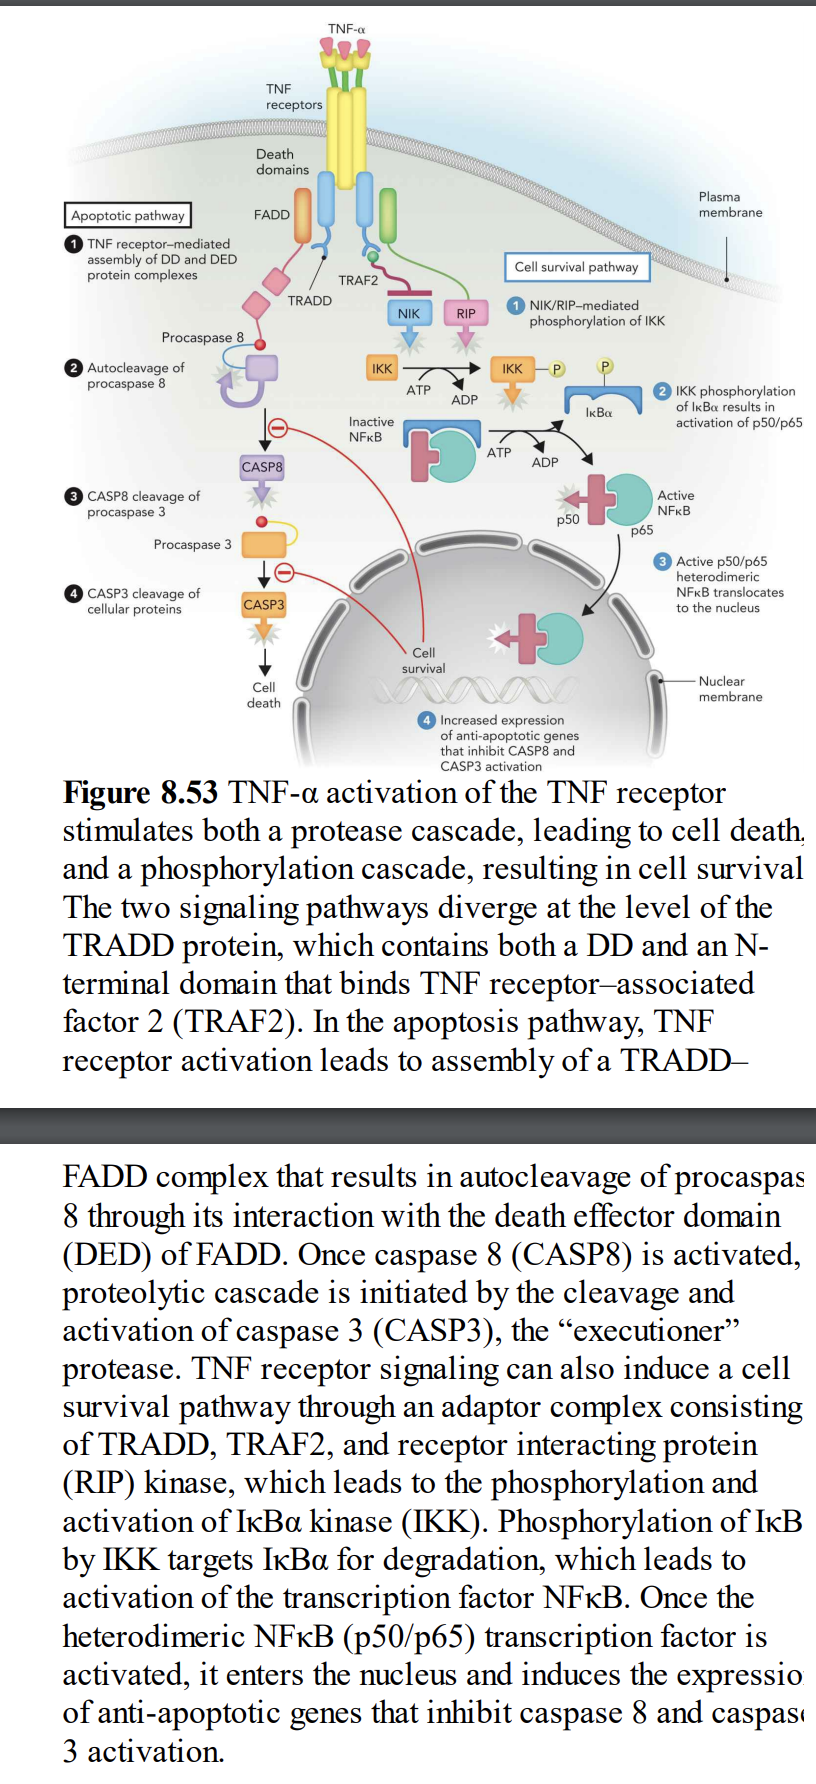 Apoptotic pathway
TNF receptor-mediated
assembly of DD and DED
protein complexes
Procaspase 8
Autocleavage of
procaspase 8
CASP8 cleavage of
procaspase 3
Procaspase 3
O CASP3 cleavage of
cellular proteins
TNF
receptors.
Death
domains
FADD
CASP8
CASP3
Cell
death
TNF-α
TRADD
TRAF2
IKK
Inactive
NFkB
NIK
ATP
RIP
ADP
13
Cell
survival
Cell survival pathway
IKK
ATP
NIK/RIP-mediated
phosphorylation of IKK
P
ADP
p50
+9
Increased expression
of anti-apoptotic genes
that inhibit CASP8 and
CASP3 activation
IkBa
p65
Plasma
membrane.
2 IKK phosphorylation
of IkBa results in
activation of p50/p65
Active
NFkB
Active p50/p65
heterodimeric
NFKB translocates.
to the nucleus
Nuclear
membrane.
Figure 8.53 TNF-a activation of the TNF receptor
stimulates both a protease cascade, leading to cell death,
and a phosphorylation cascade, resulting in cell survival
The two signaling pathways diverge at the level of the
TRADD protein, which contains both a DD and an N-
terminal domain that binds TNF receptor-associated
factor 2 (TRAF2). In the apoptosis pathway, TNF
receptor activation leads to assembly of a TRADD-
FADD complex that results in autocleavage of procaspas
8 through its interaction with the death effector domain
(DED) of FADD. Once caspase 8 (CASP8) is activated,
proteolytic cascade is initiated by the cleavage and
activation of caspase 3 (CASP3), the "executioner"
protease. TNF receptor signaling can also induce a cell
survival pathway through an adaptor complex consisting
of TRADD, TRAF2, and receptor interacting protein
(RIP) kinase, which leads to the phosphorylation and
activation of IkBa kinase (IKK). Phosphorylation of IKB
by IKK targets IKBα for degradation, which leads to
activation of the transcription factor NFKB. Once the
heterodimeric NFkB (p50/p65) transcription factor is
activated, it enters the nucleus and induces the expressio
of anti-apoptotic genes that inhibit caspase 8 and caspas
3 activation.